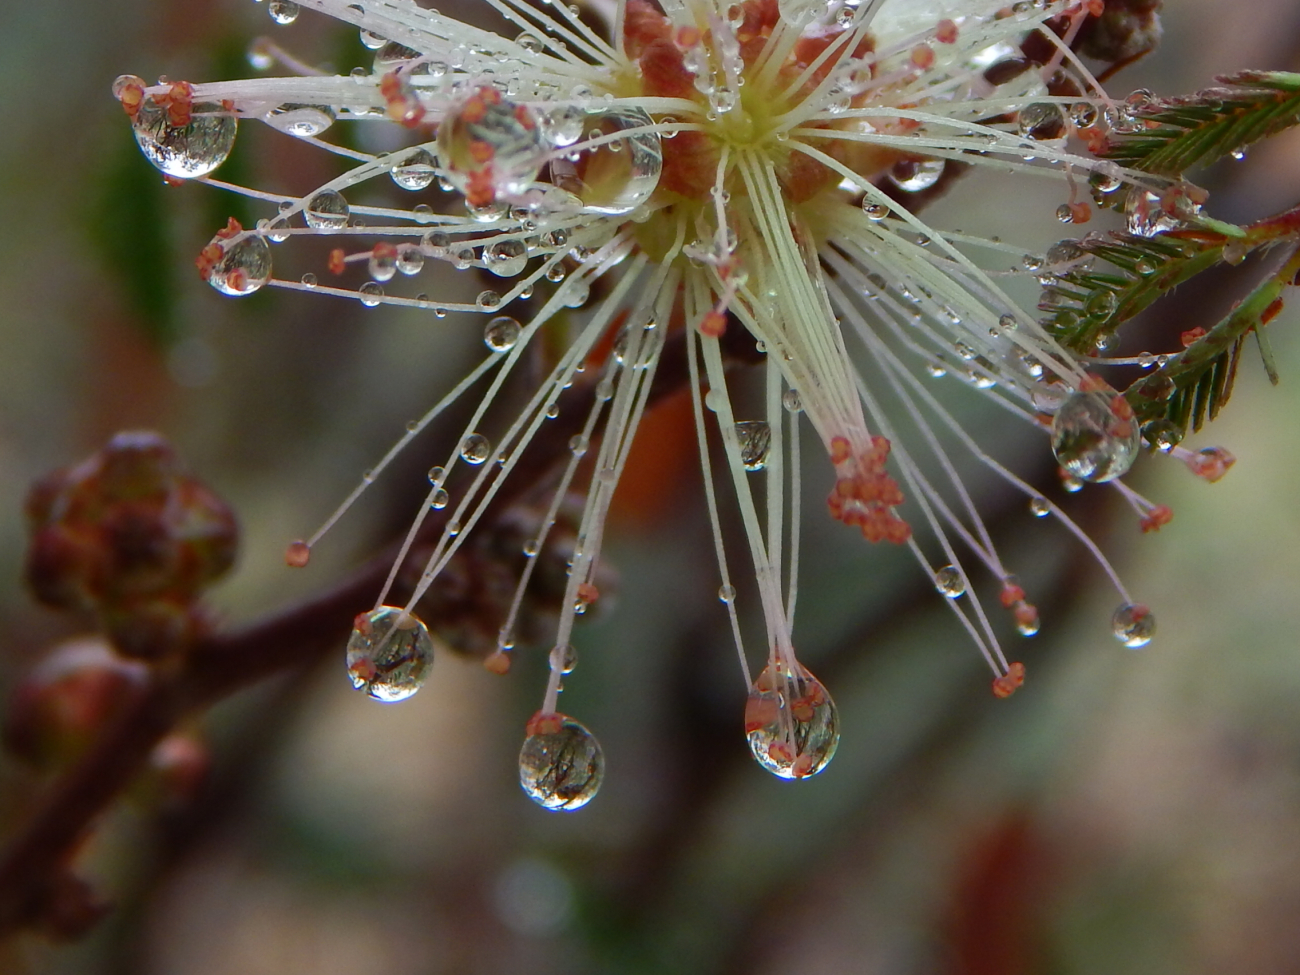 I stood under an umbrella in the rain to capture this Pink Fairy Duster